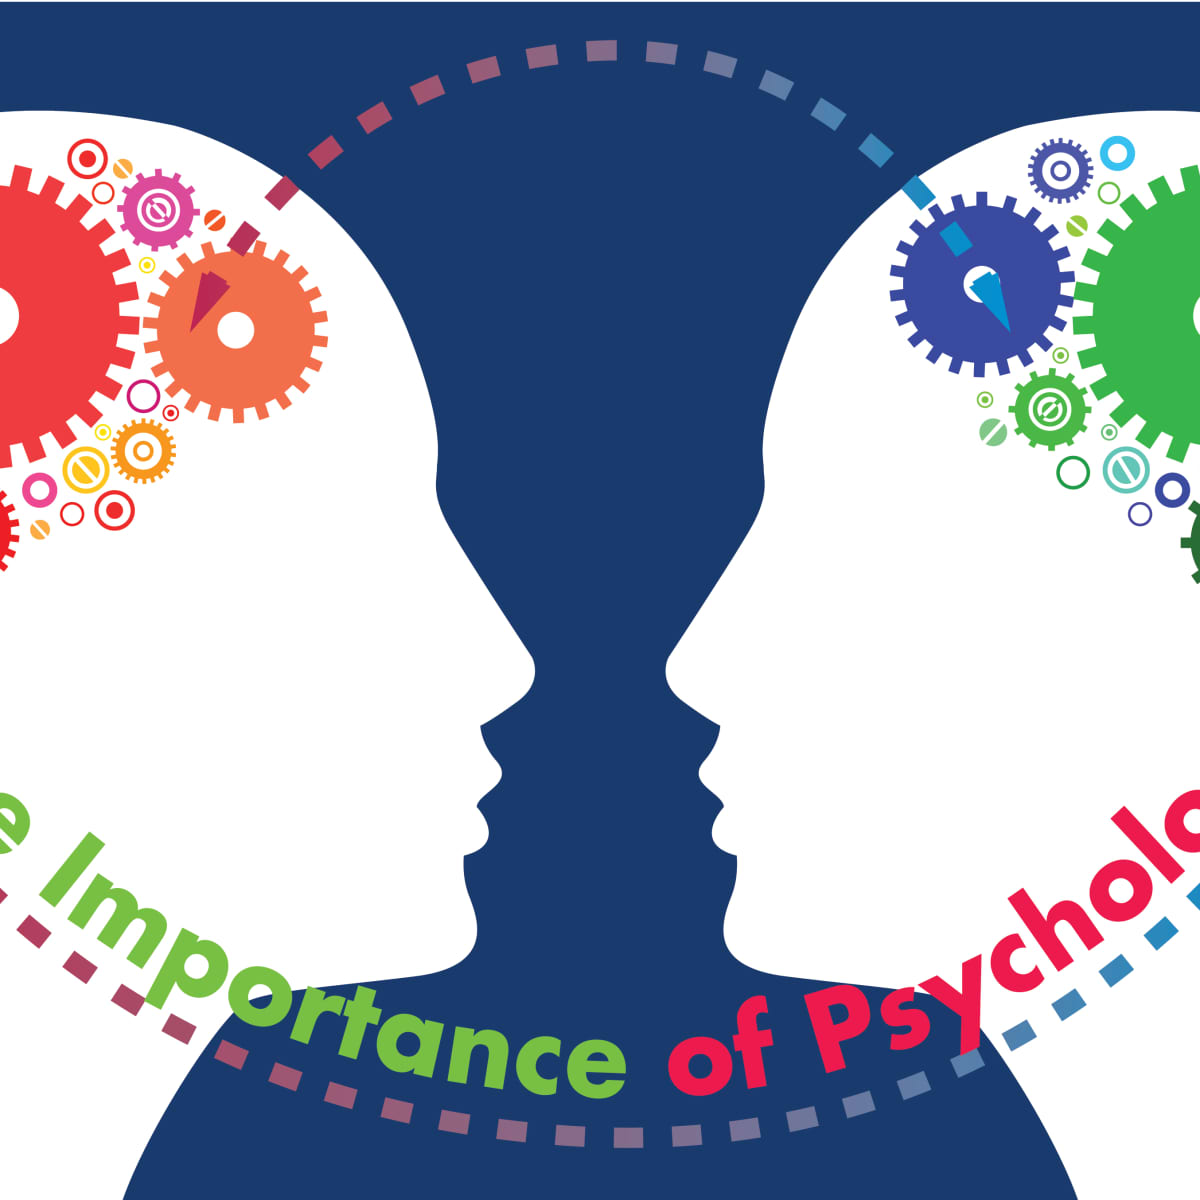 relation between sociology and psychology